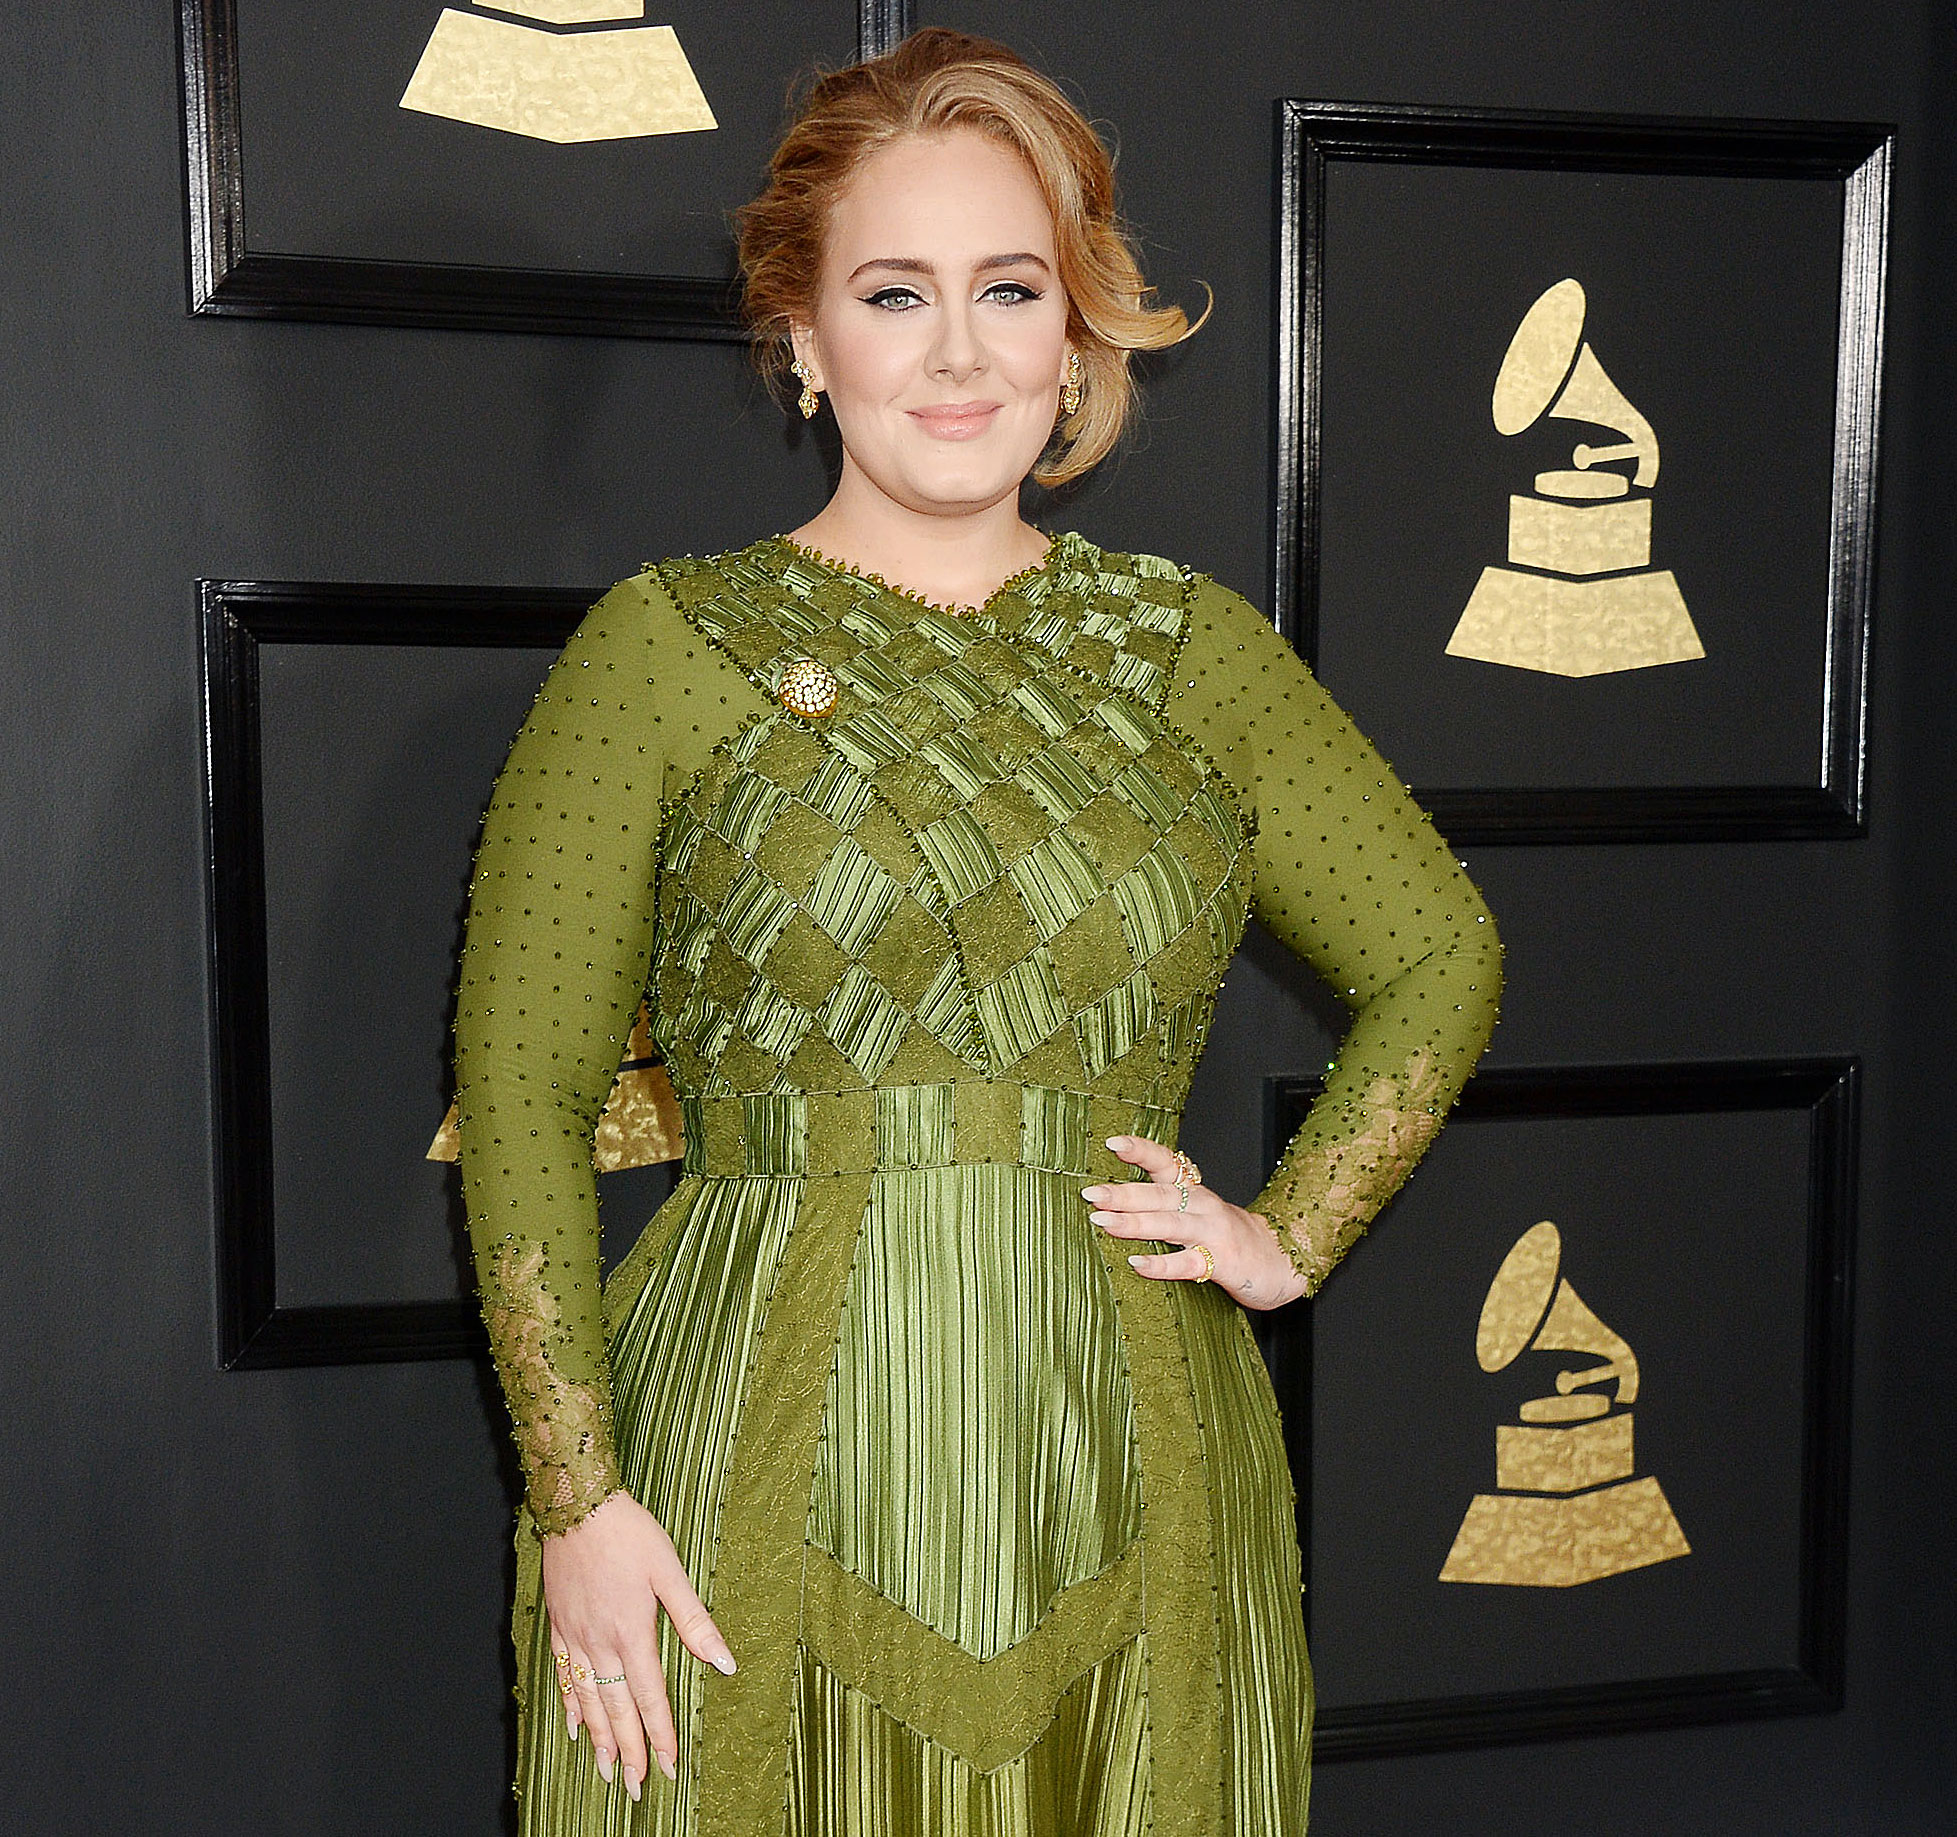 Adele Files for Divorce From Simon Konecki After 2 Years